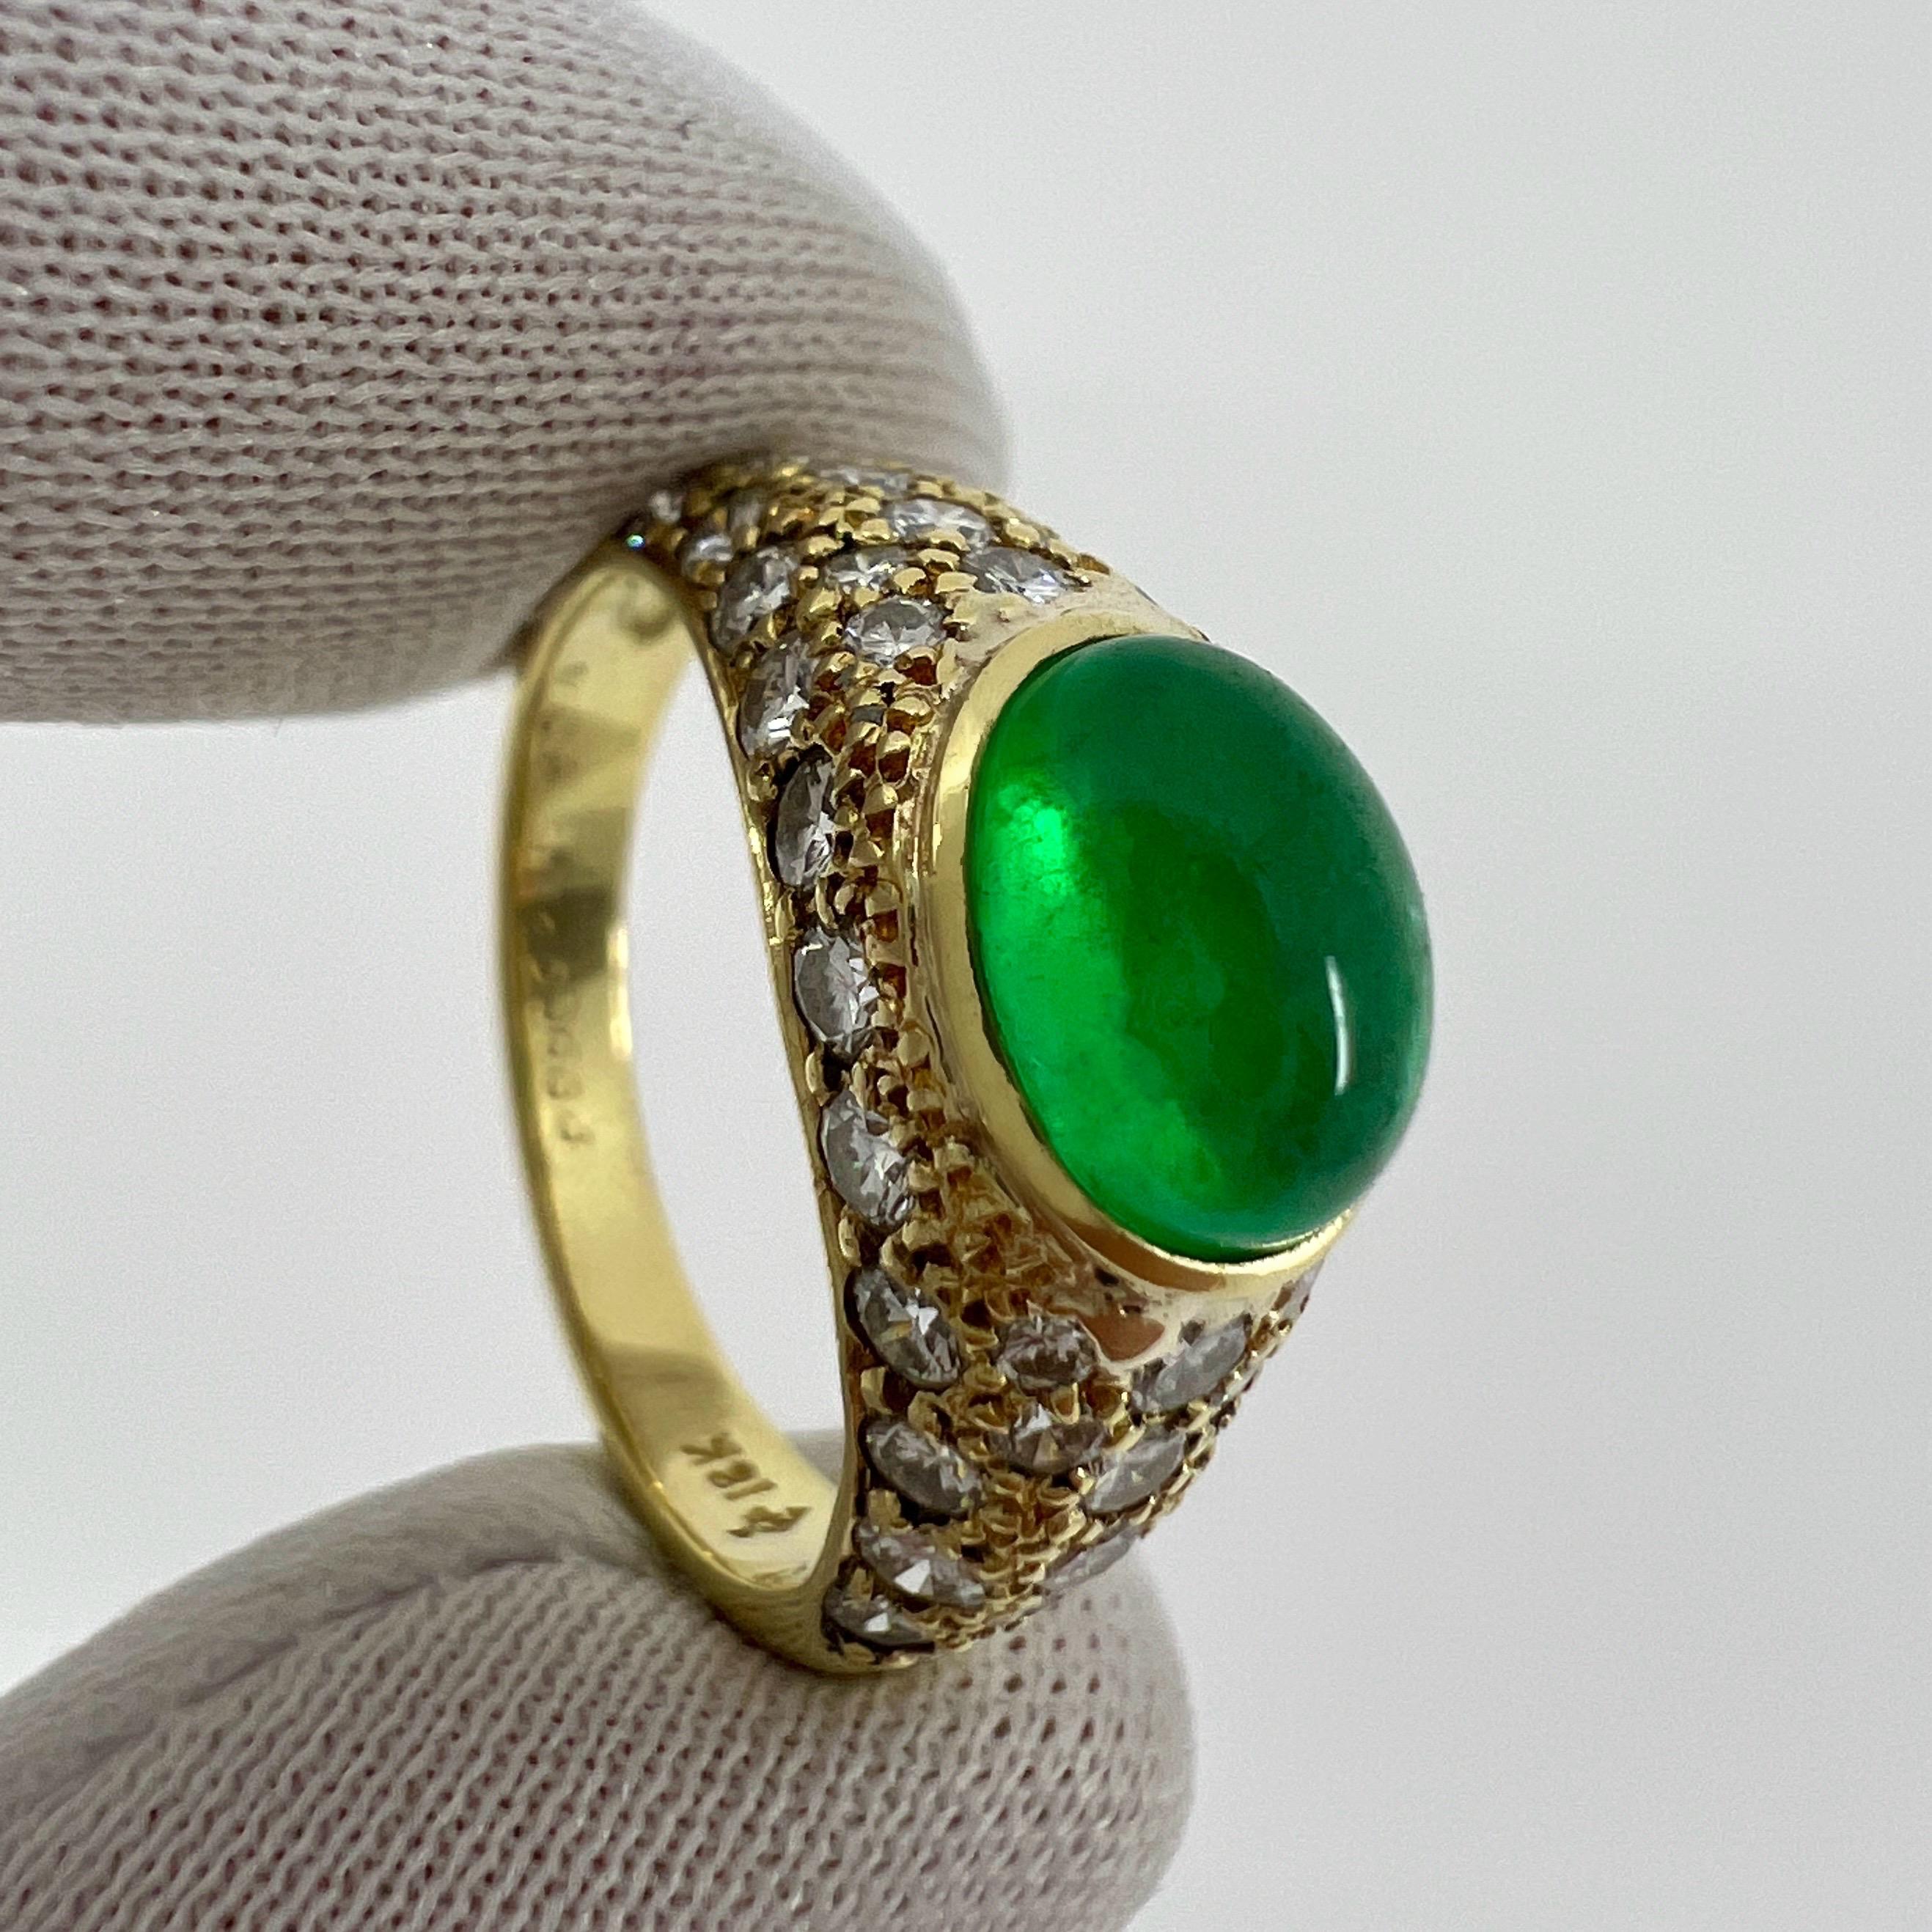 Rare Vintage Van Cleef & Arpels 2 Carat Emerald And Diamond Cocktail Dome Ring For Sale 3